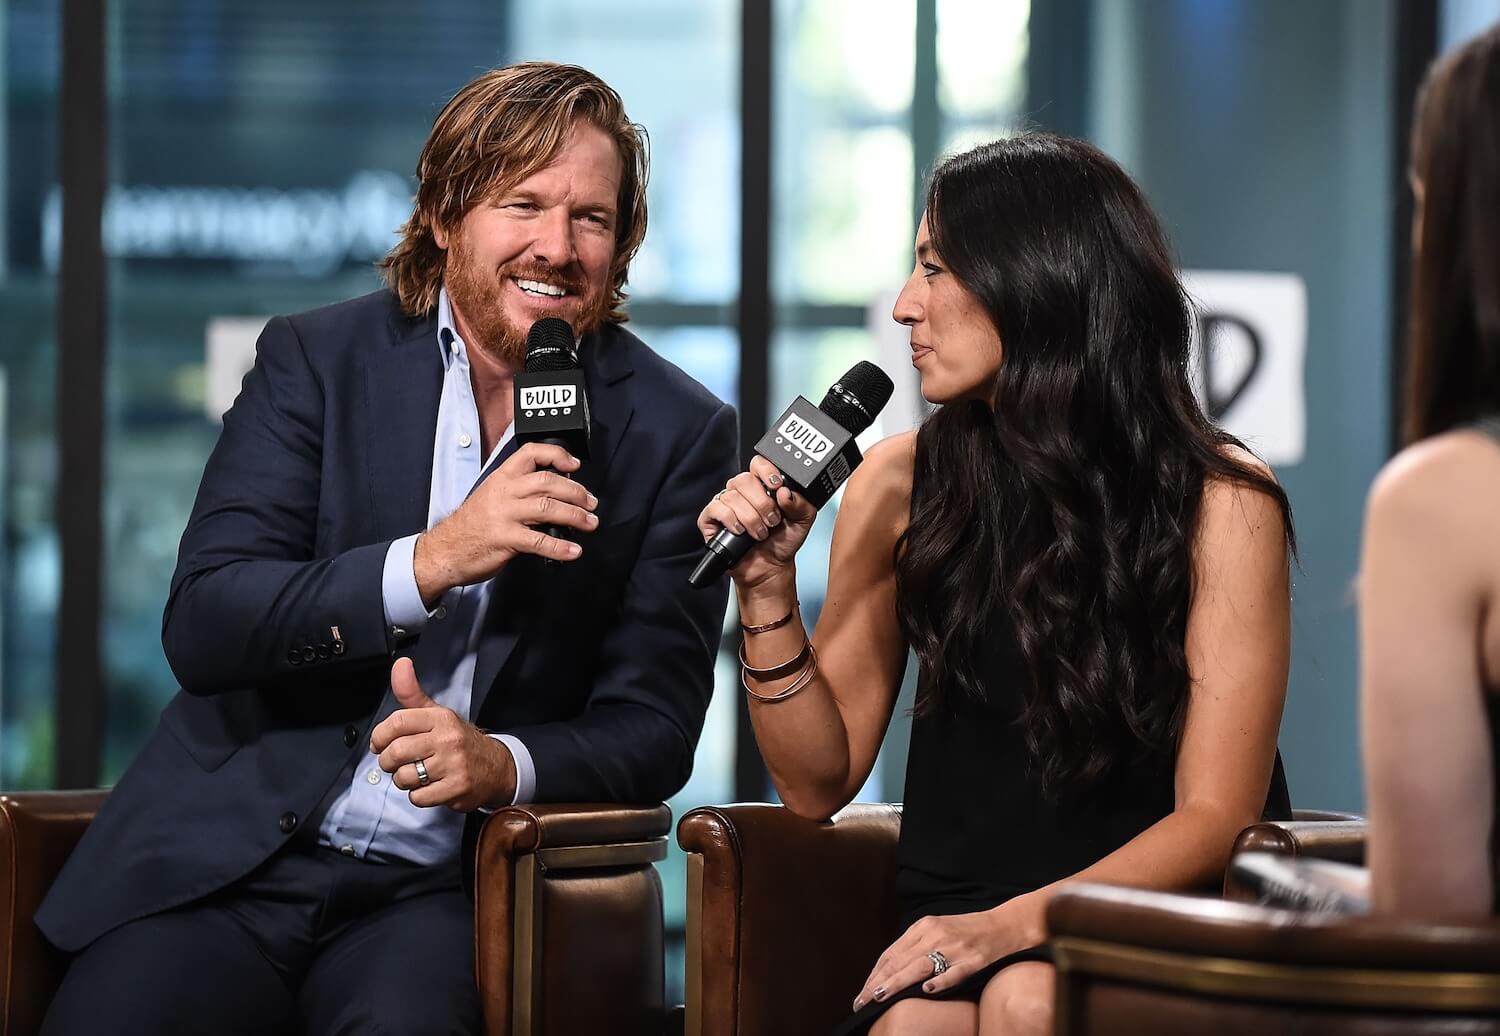 'Fixer Upper' stars Chip and Joanna Gaines speaking into microphones while sitting next to each other